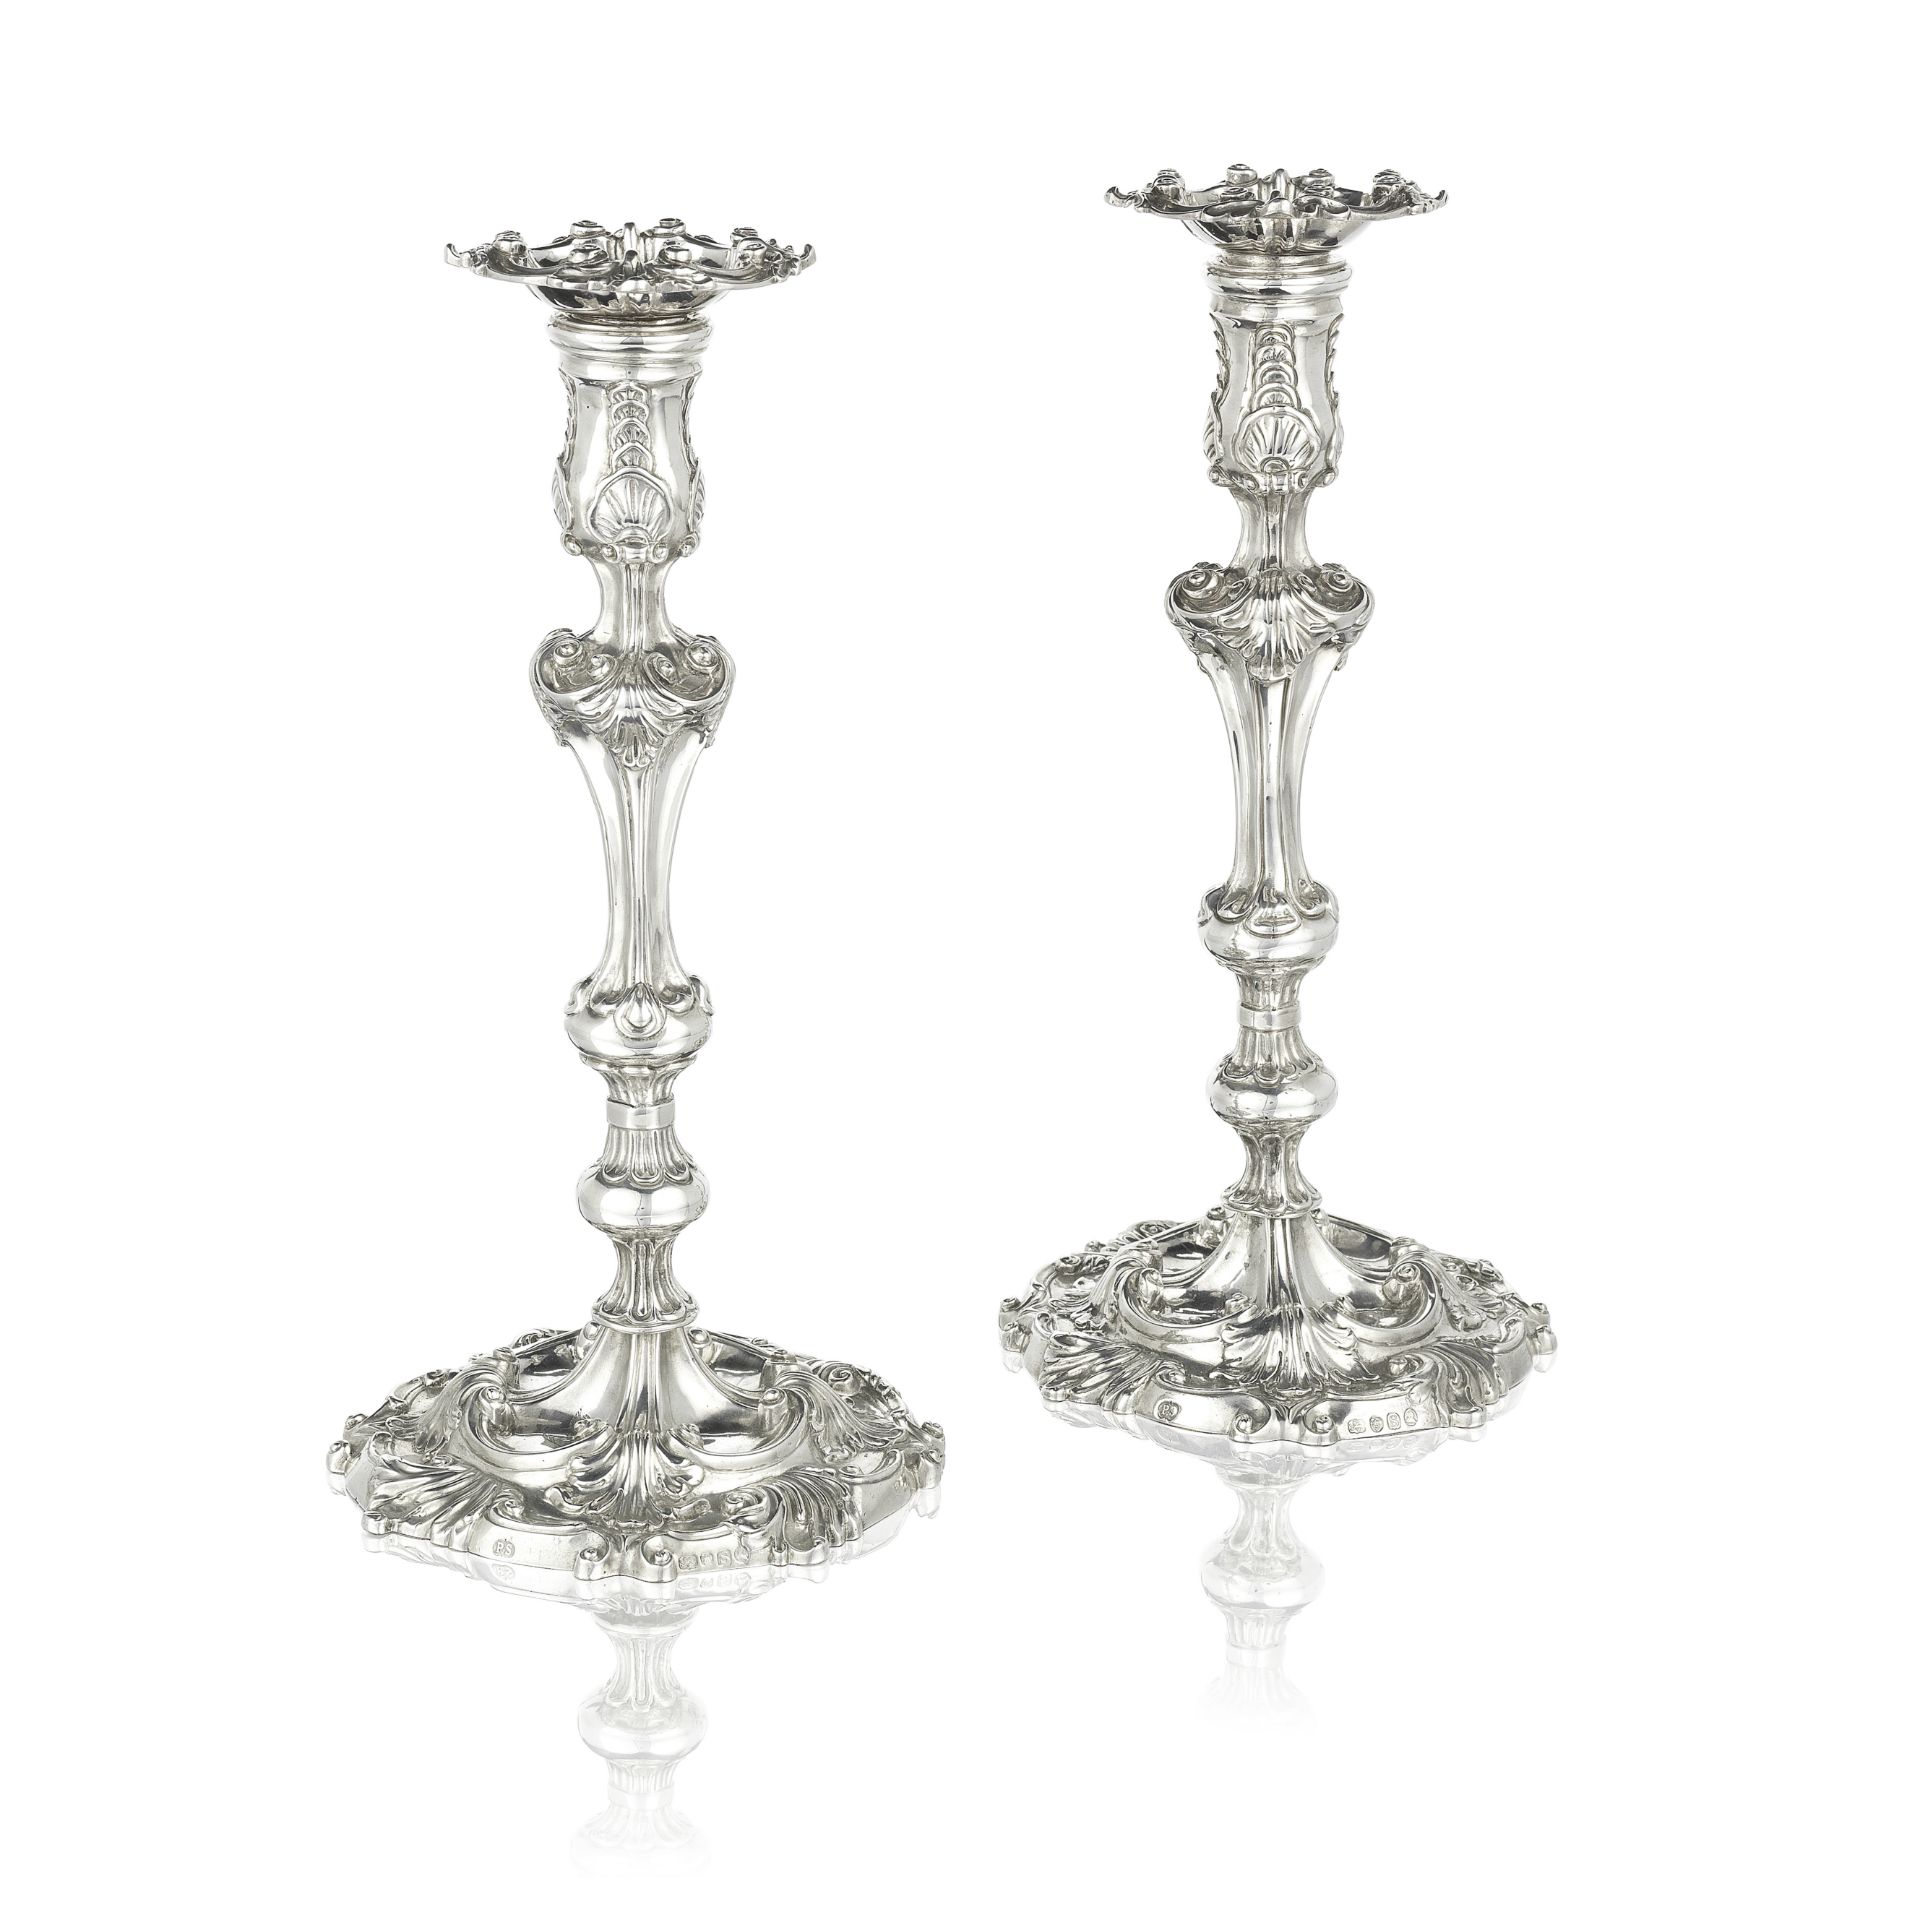 A pair of George III silver candlesticks Paul Storr, London 1813 (2)